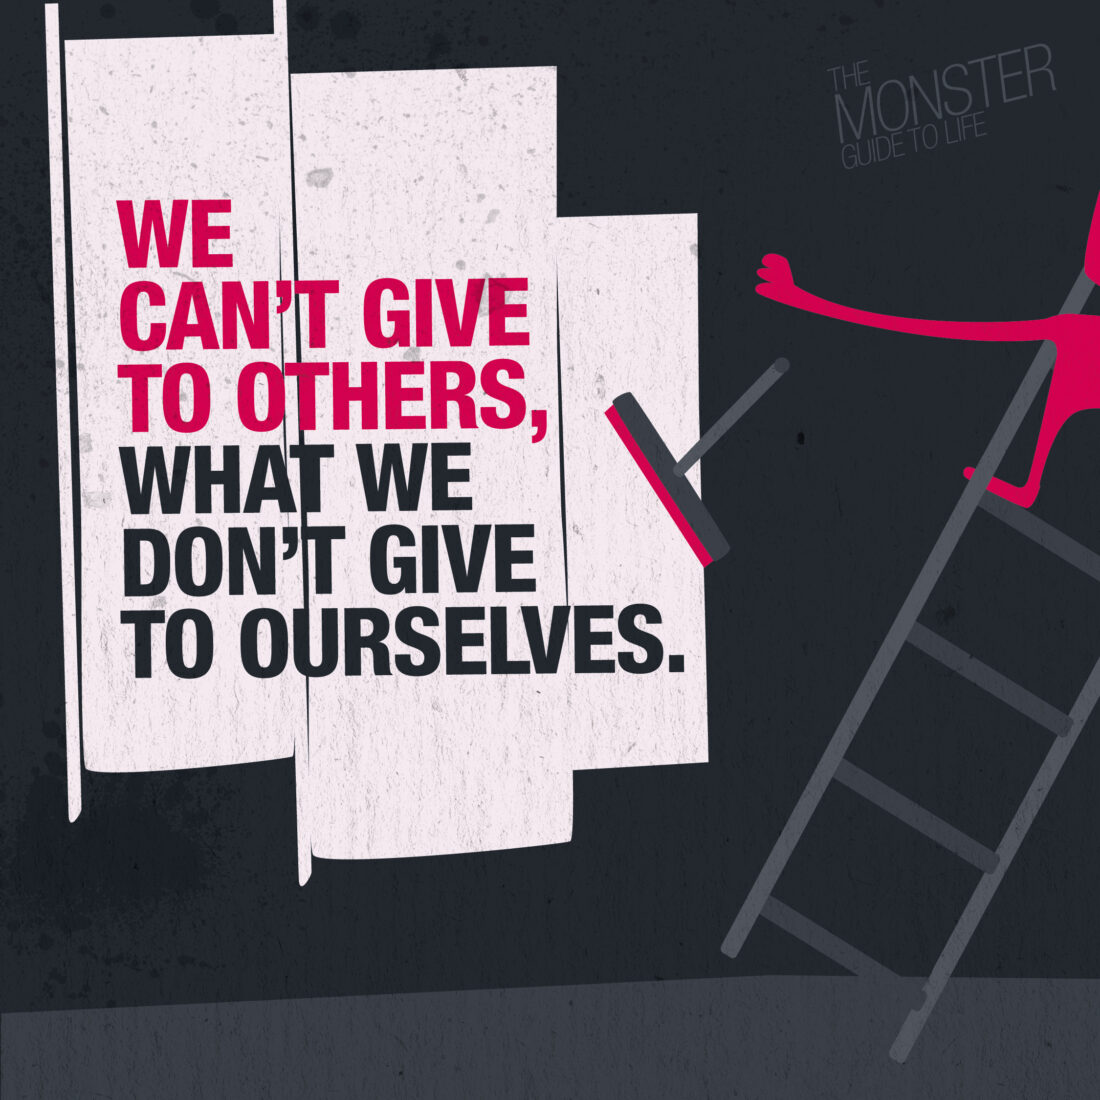 We can’t give to others what we don’t give to ourselves